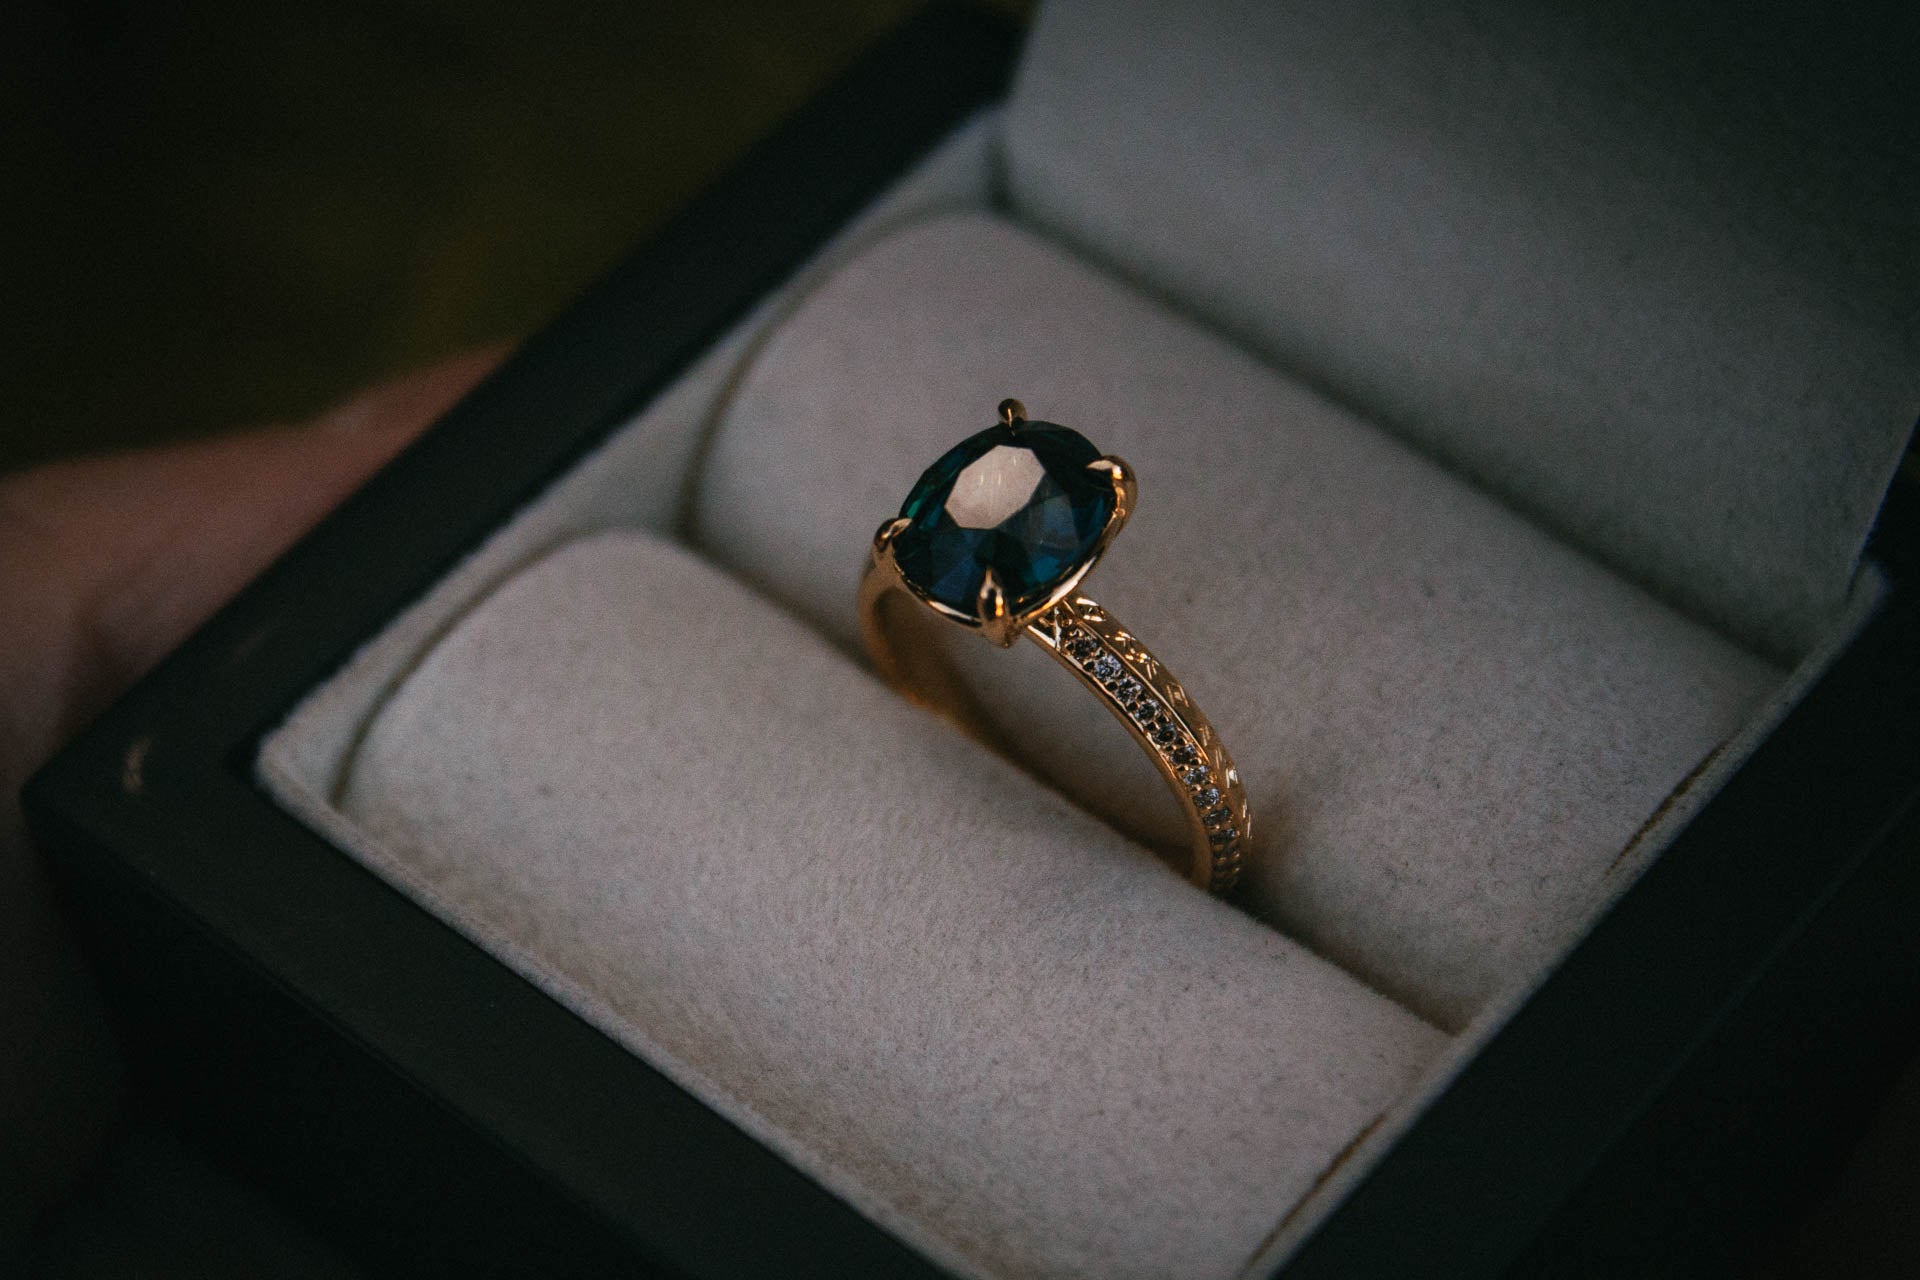 Moira Patience Fine Jewellery Bespoke Engraved Teal Sapphire Engagement Ring